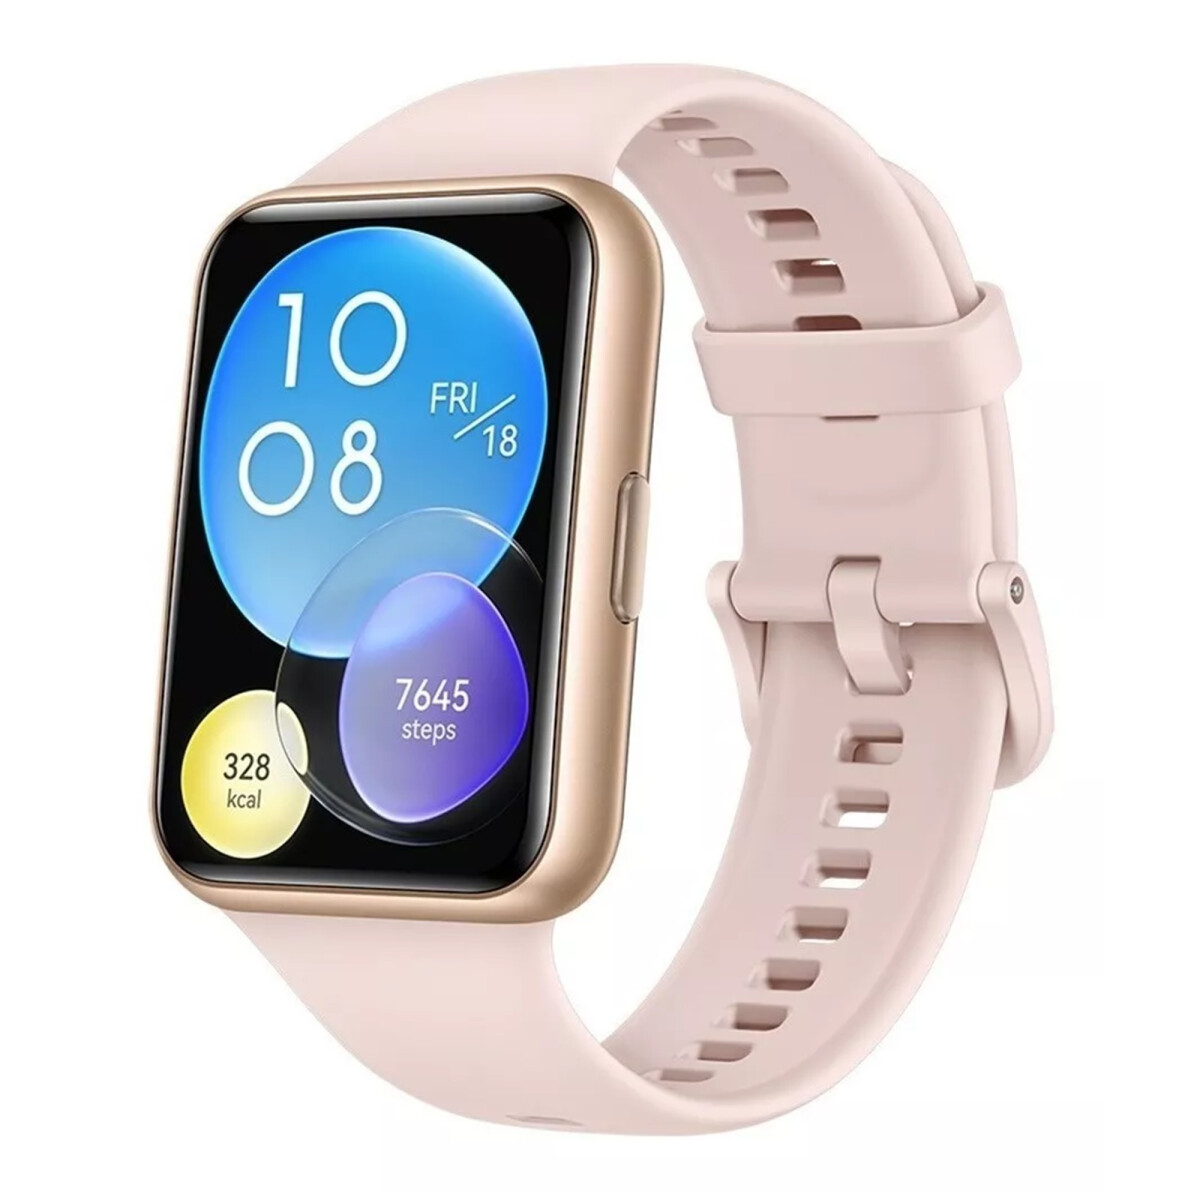 Huawei - Smartwatch Watch Fit 2 Active Edition - 5ATM. 1,74" Táctil Amoled. Wifi. Bluetooth. - 001 